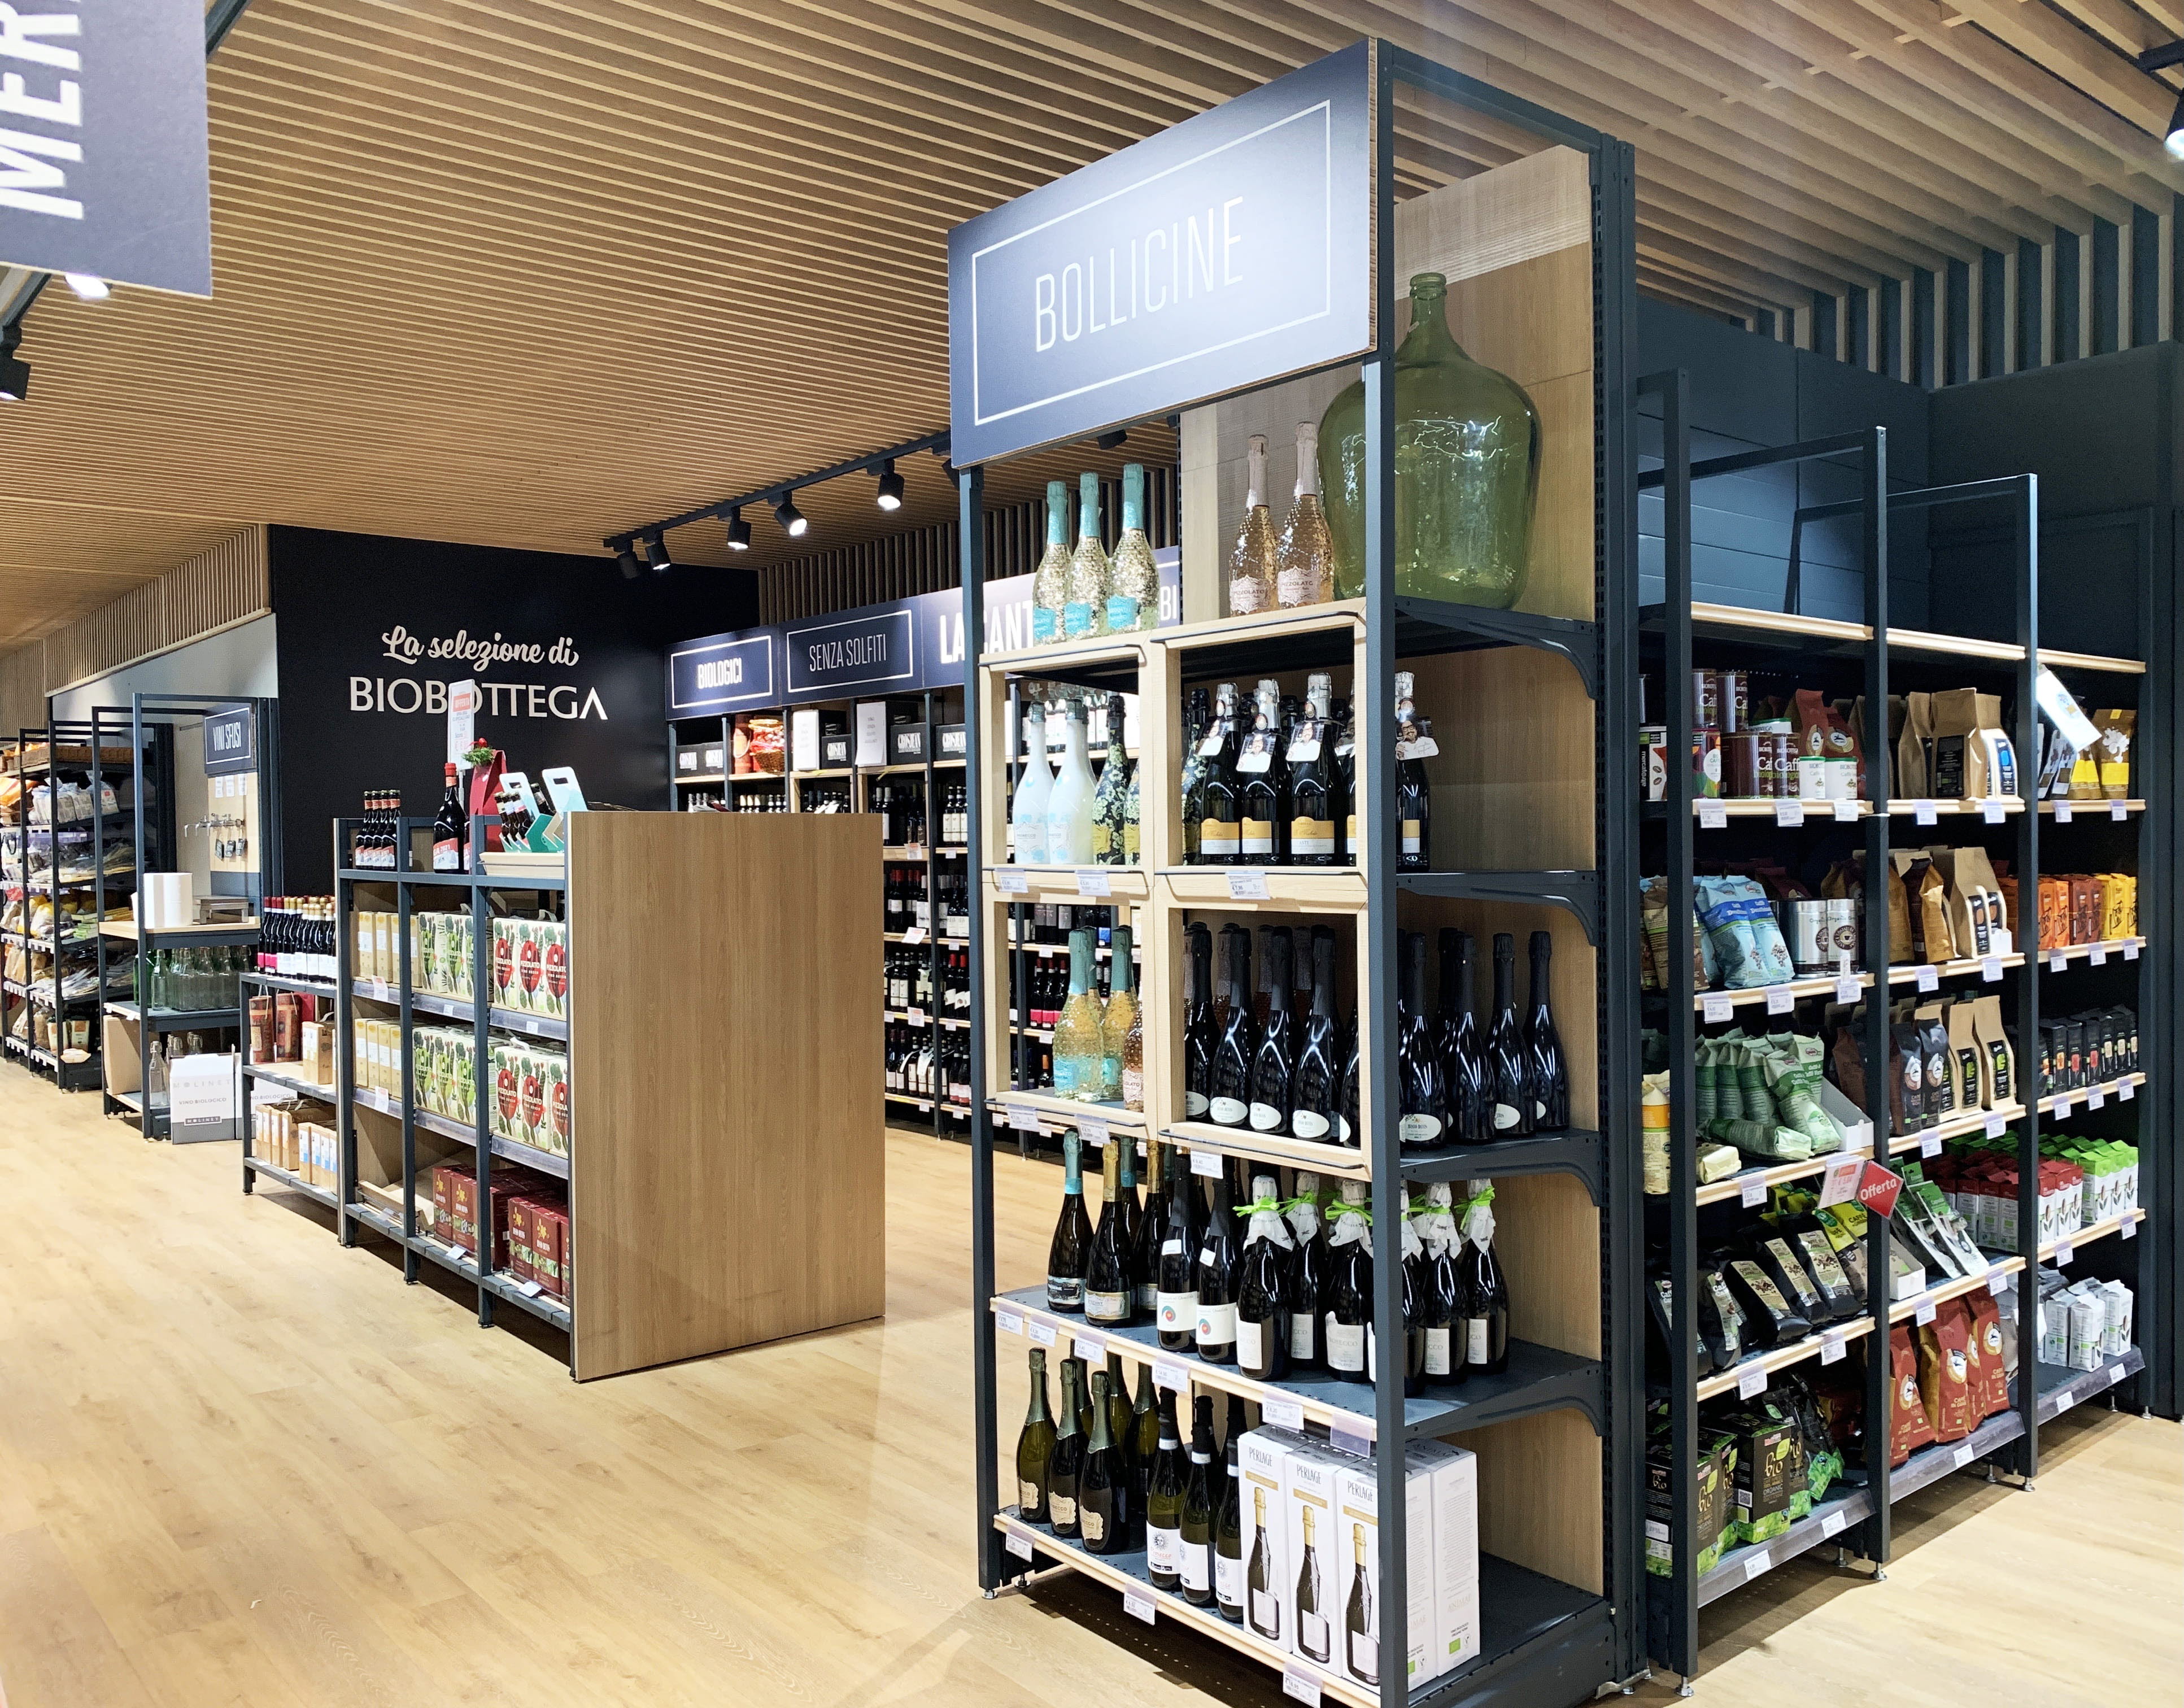 Professional solution design for retail_Shelving for supermarket grocery store_BIOBOTTEGA_AOSTA_ITALY